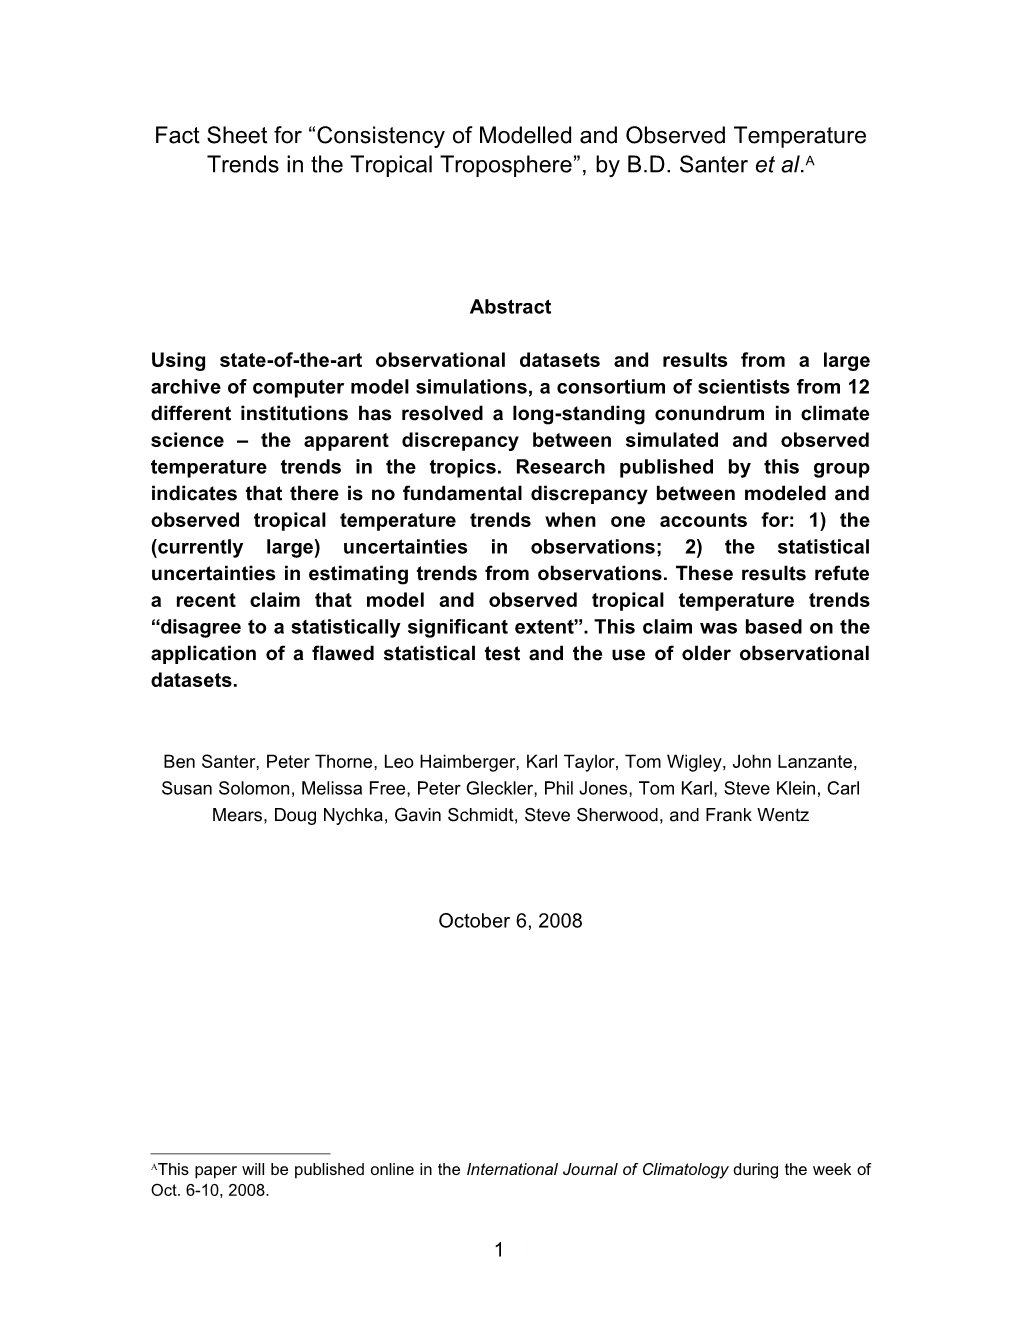 Fact Sheet for “Consistency of Modelled and Observed Temperature Trends in the Tropical Troposphere”, by B.D